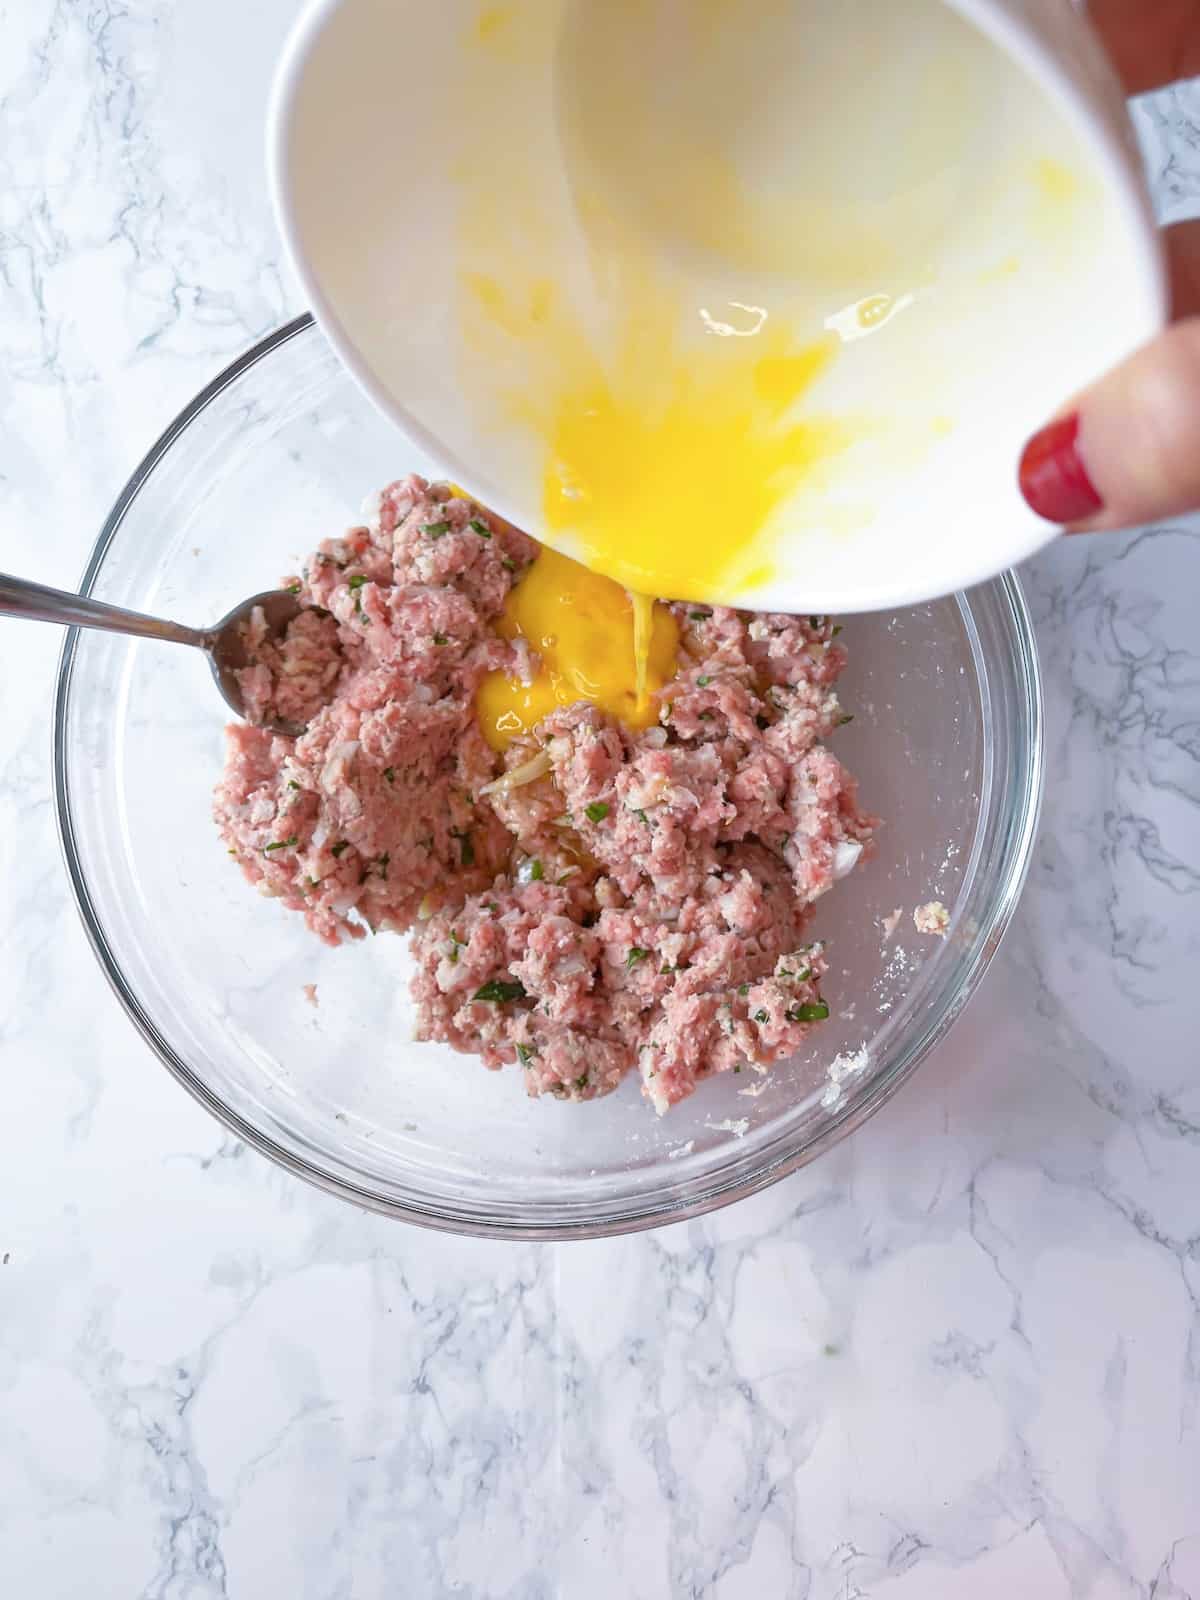 gluten-free turkey meatball mixture with egg being added to it